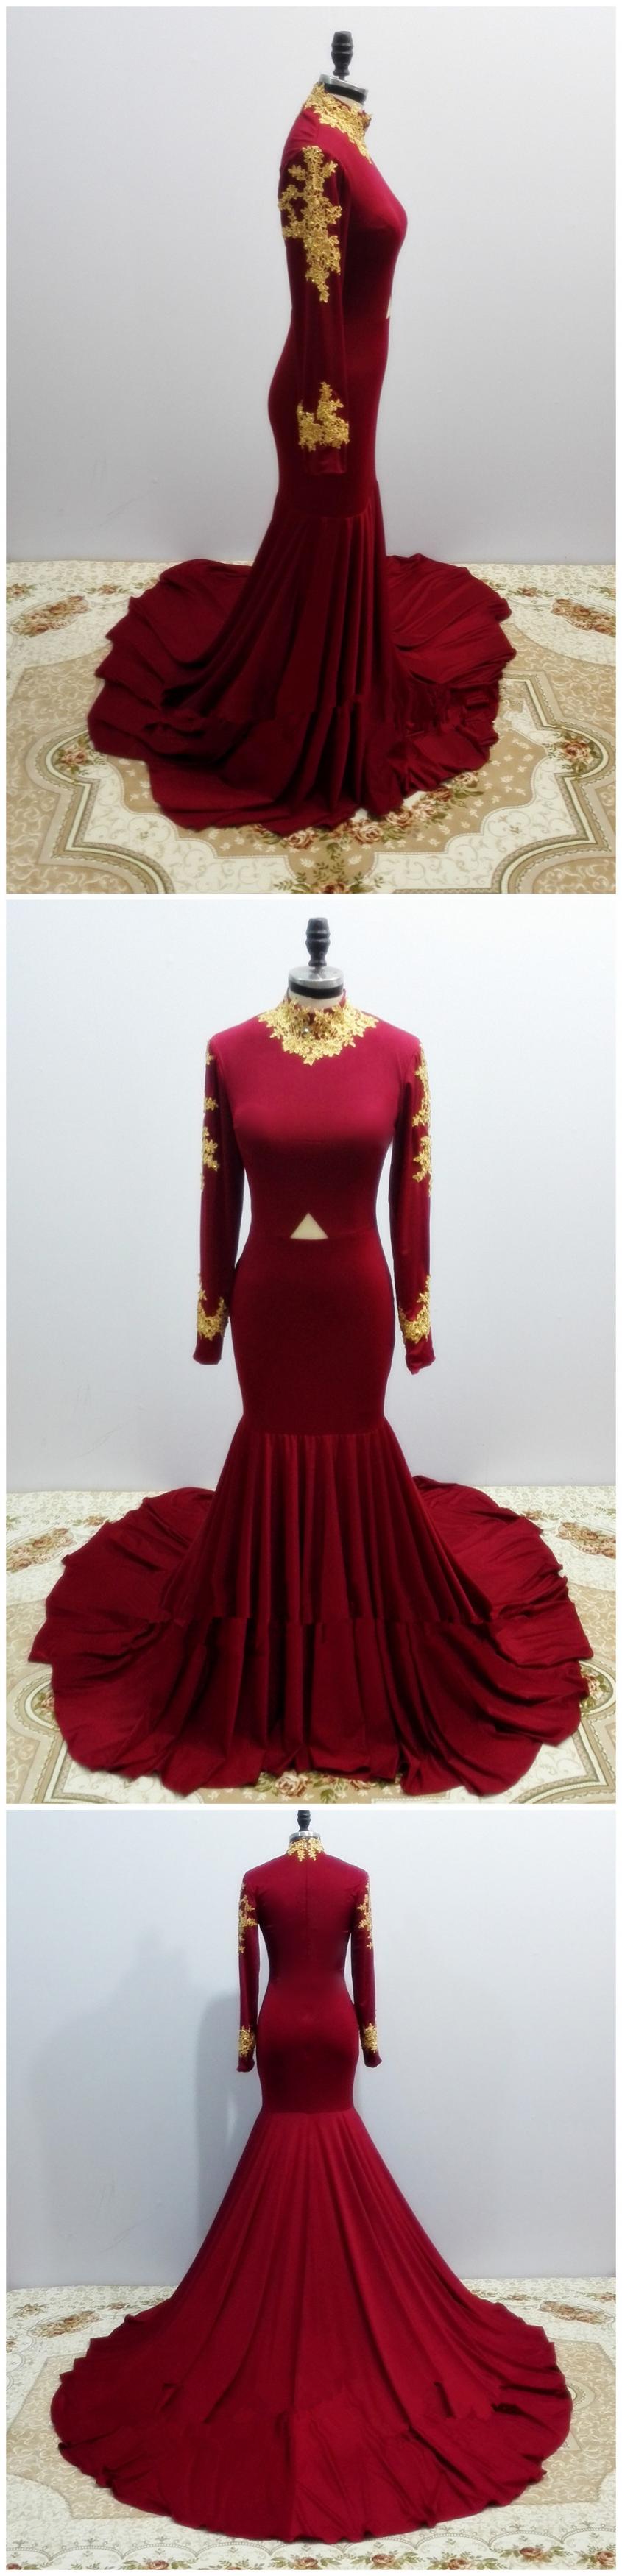 Real Photos Graceful Long Sleeve Burgundy Prom Dresses 2017 High Neckline Mermaid Stretch Spandex Prom Dress With Gold Lace